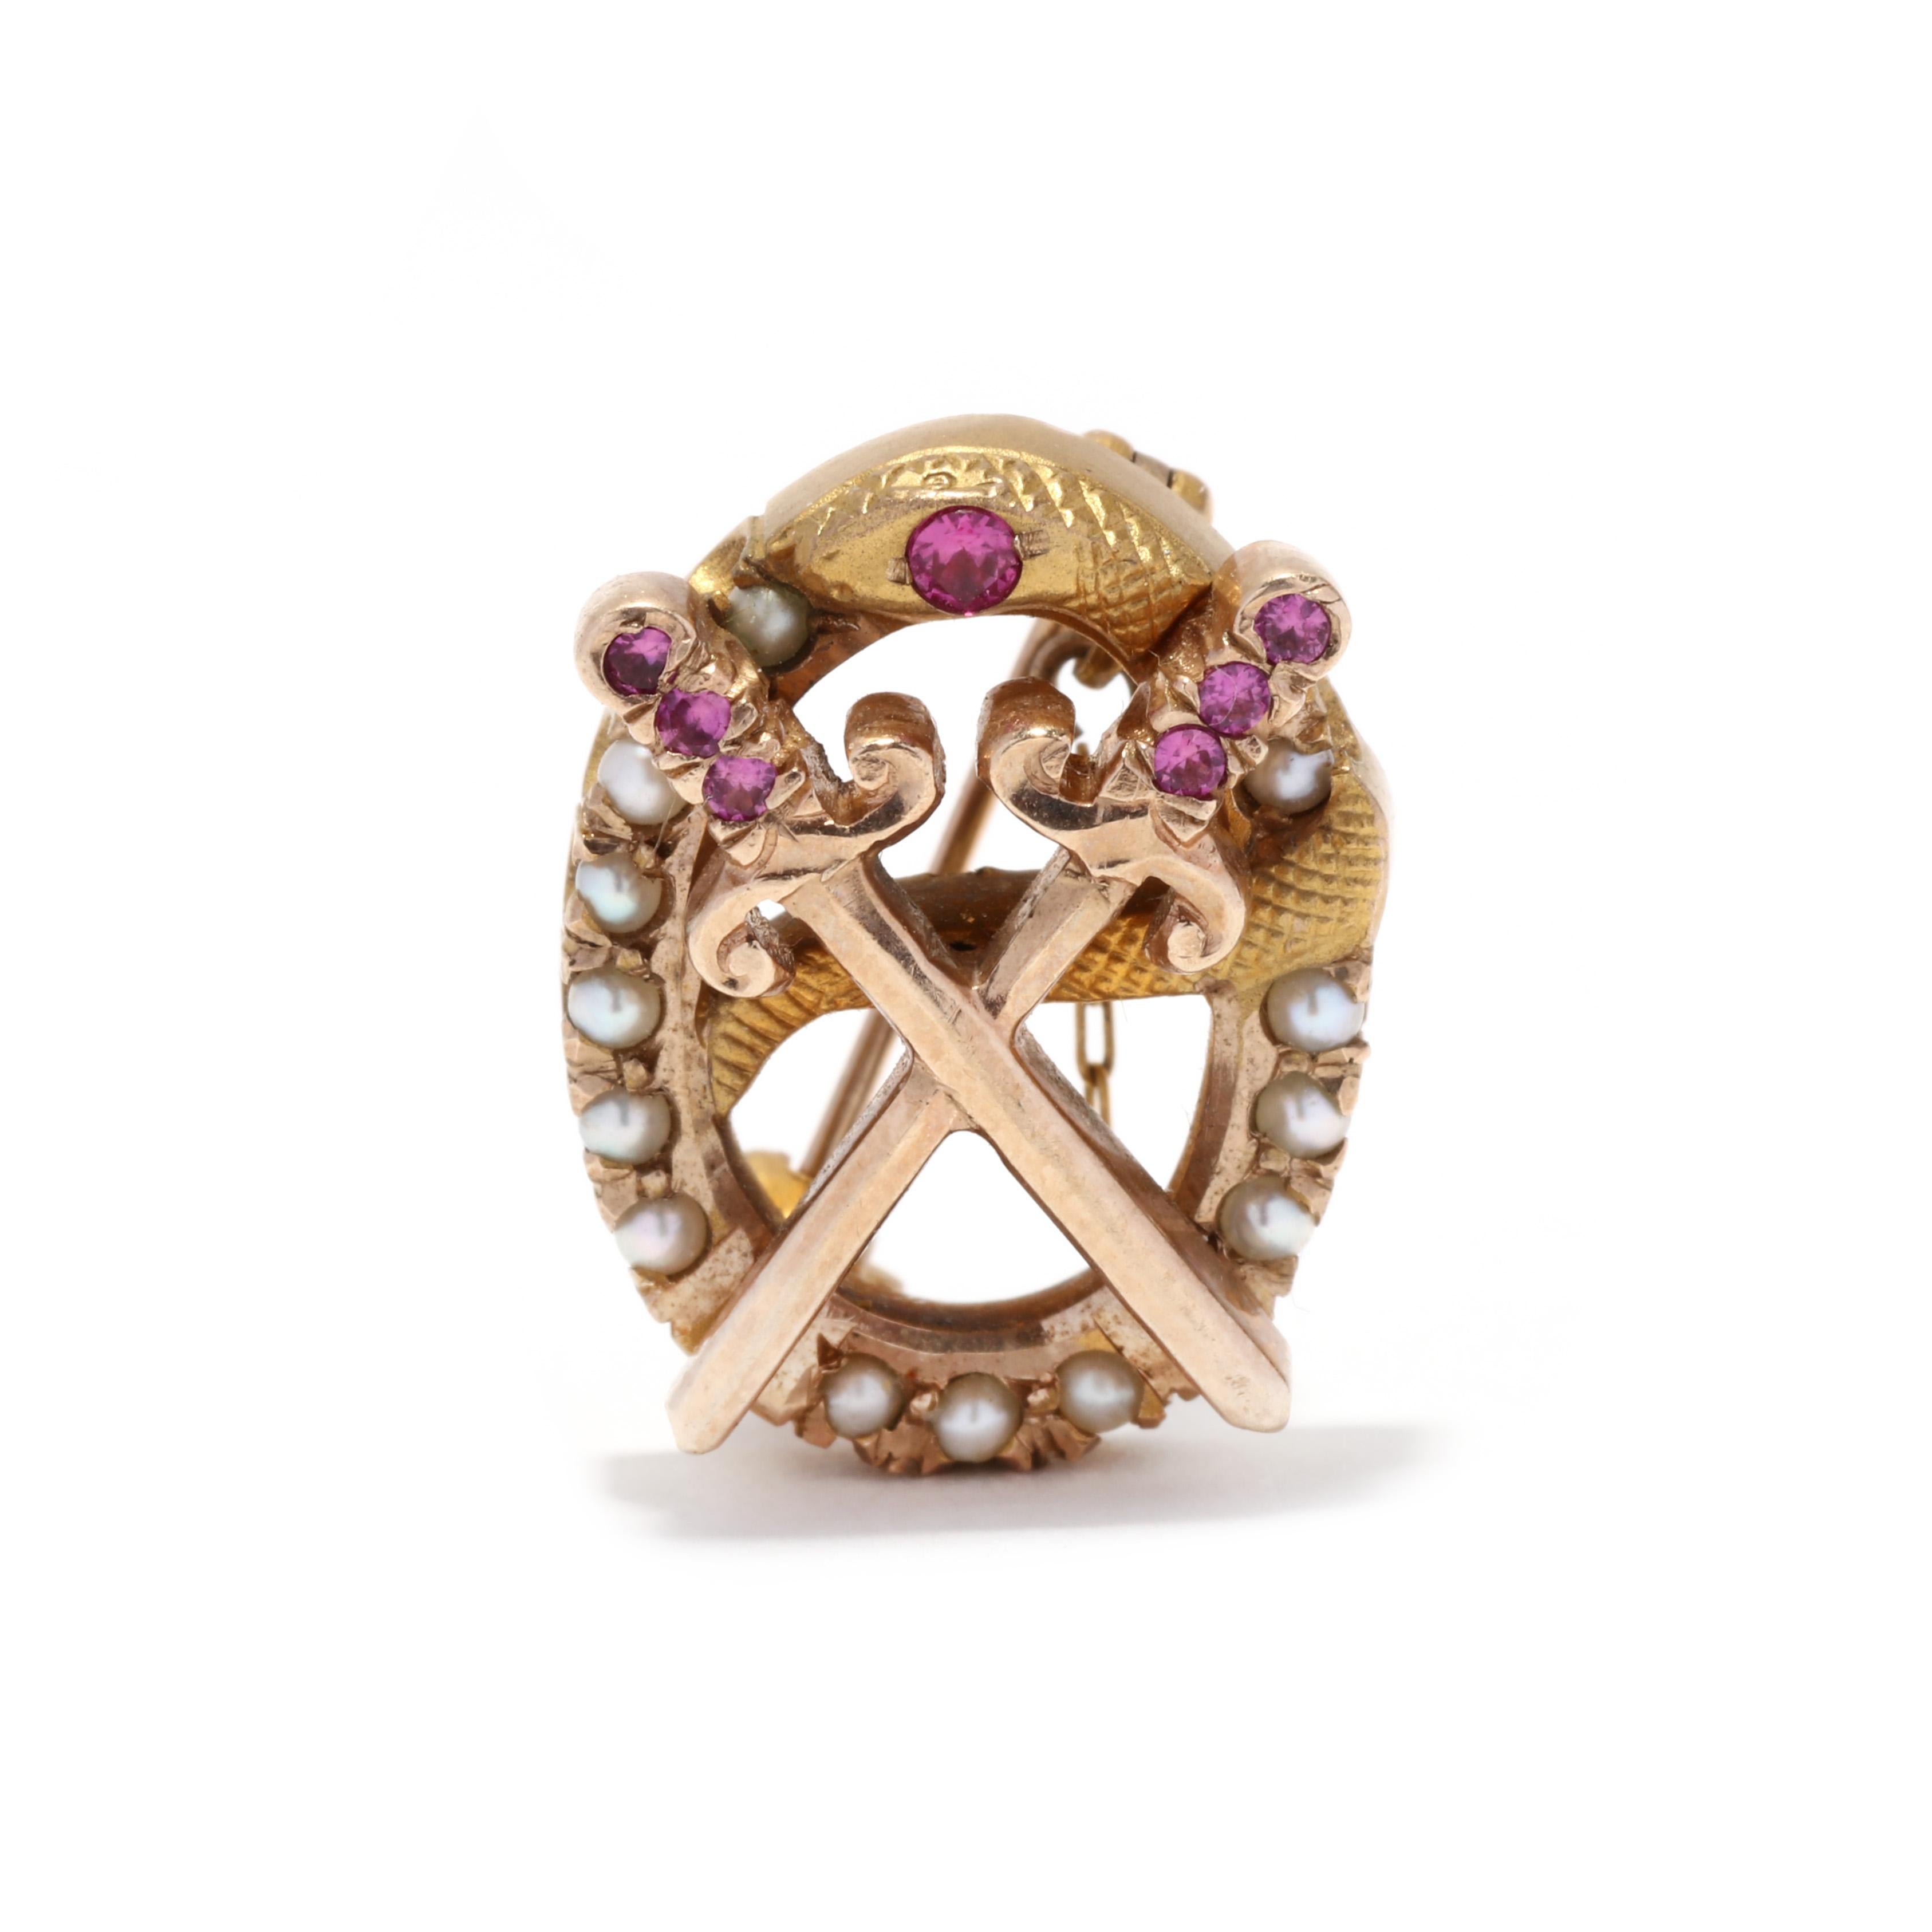 A vintage 10 karat yellow gold, synthetic ruby and seed pearl Theta Chi fraternity pin. This pin features an oval design with a coiled snake motif and two crossing swords, set with round cut synthetic rubies and seed pearls.

Length: 5/8 in.

Width: